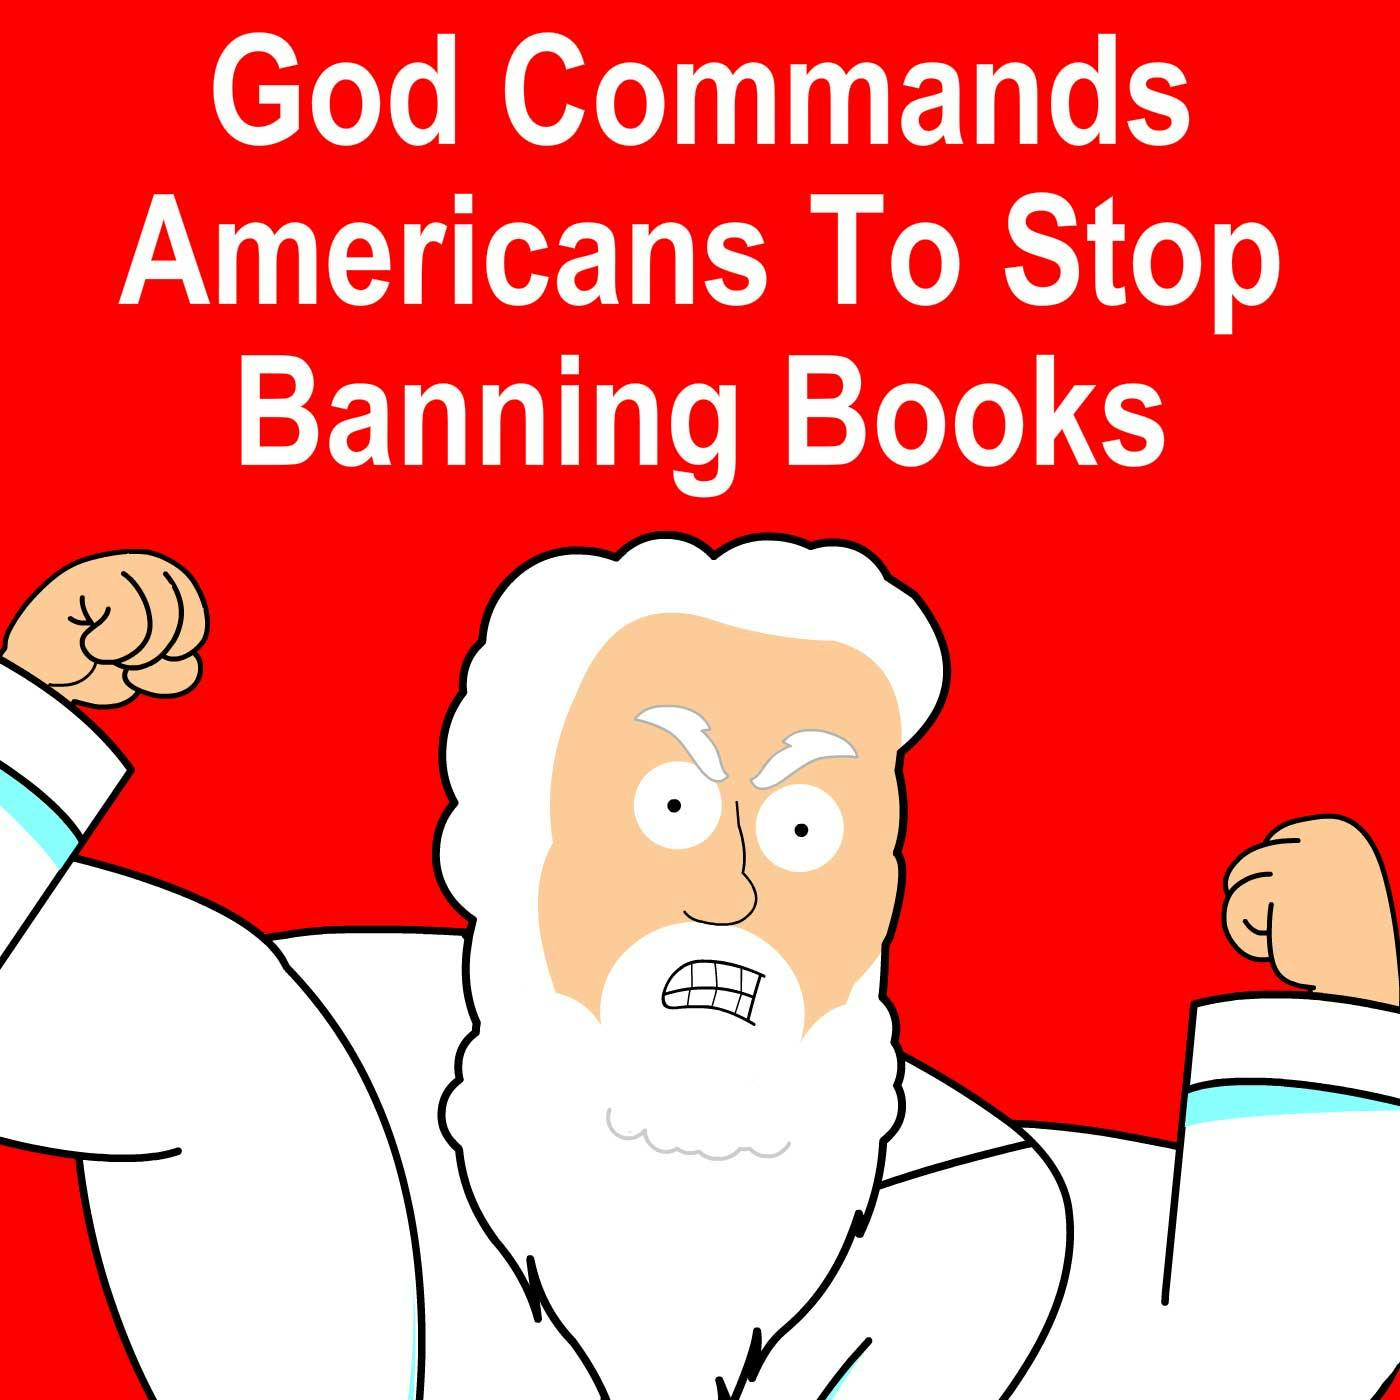 God Commands Americans To Stop Banning Books